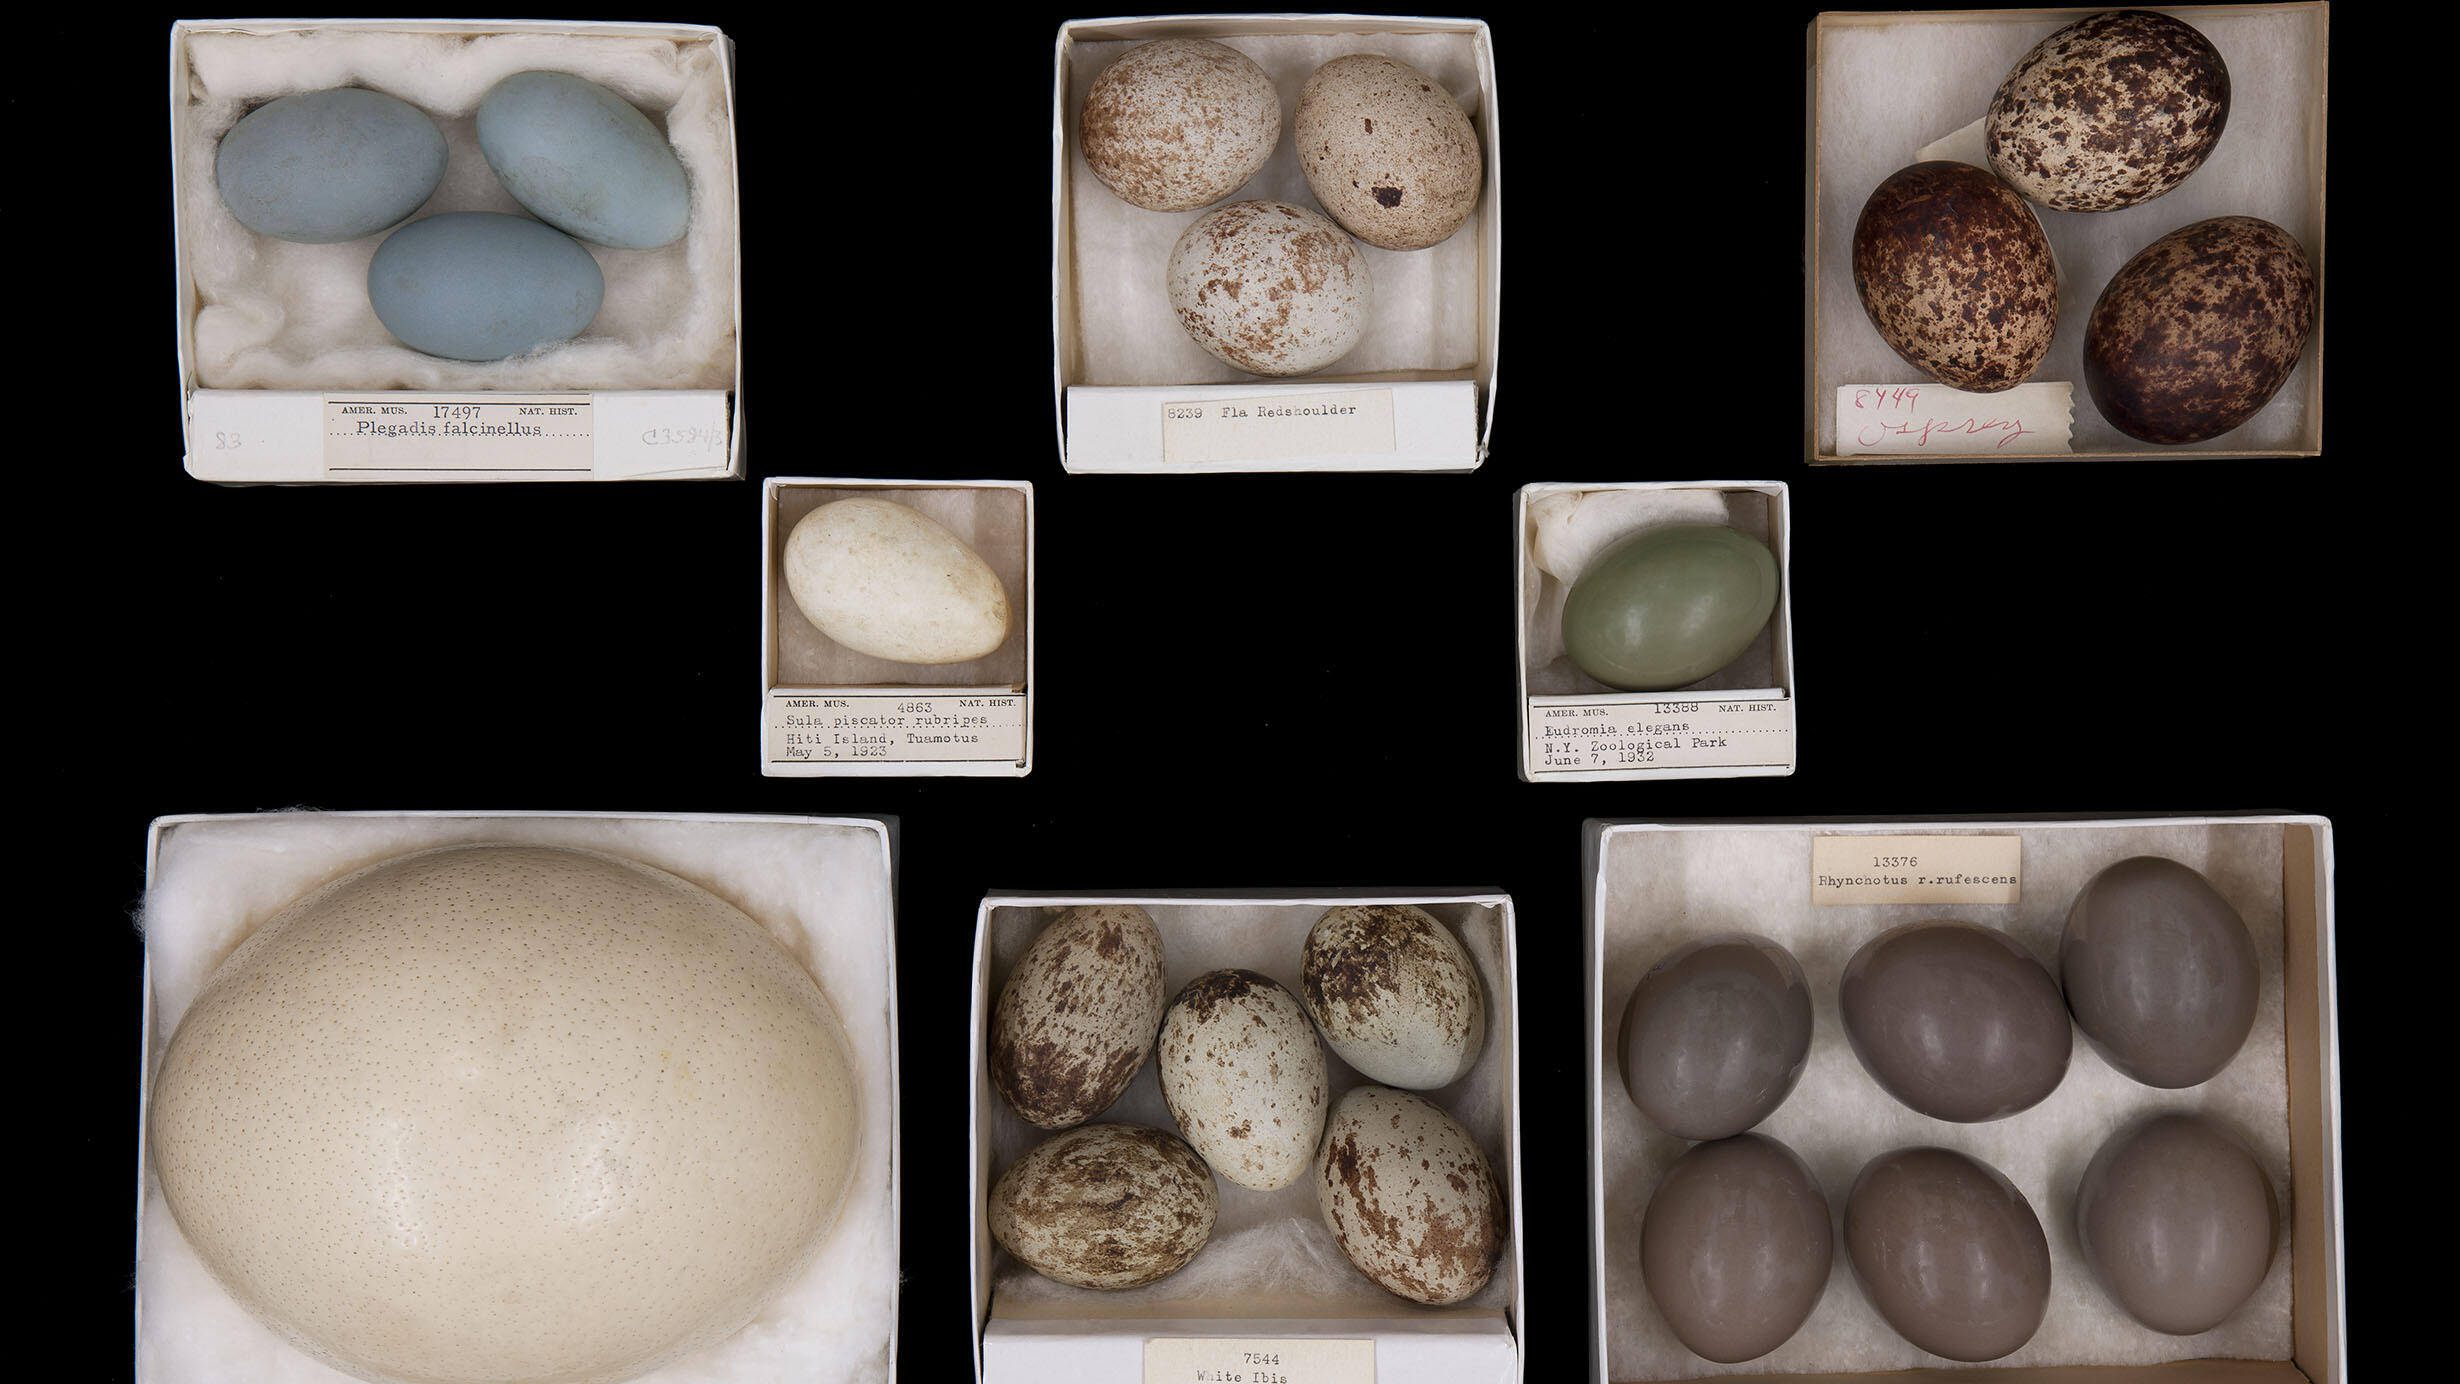 Several small open boxes, each of which holds different bird egg specimens.